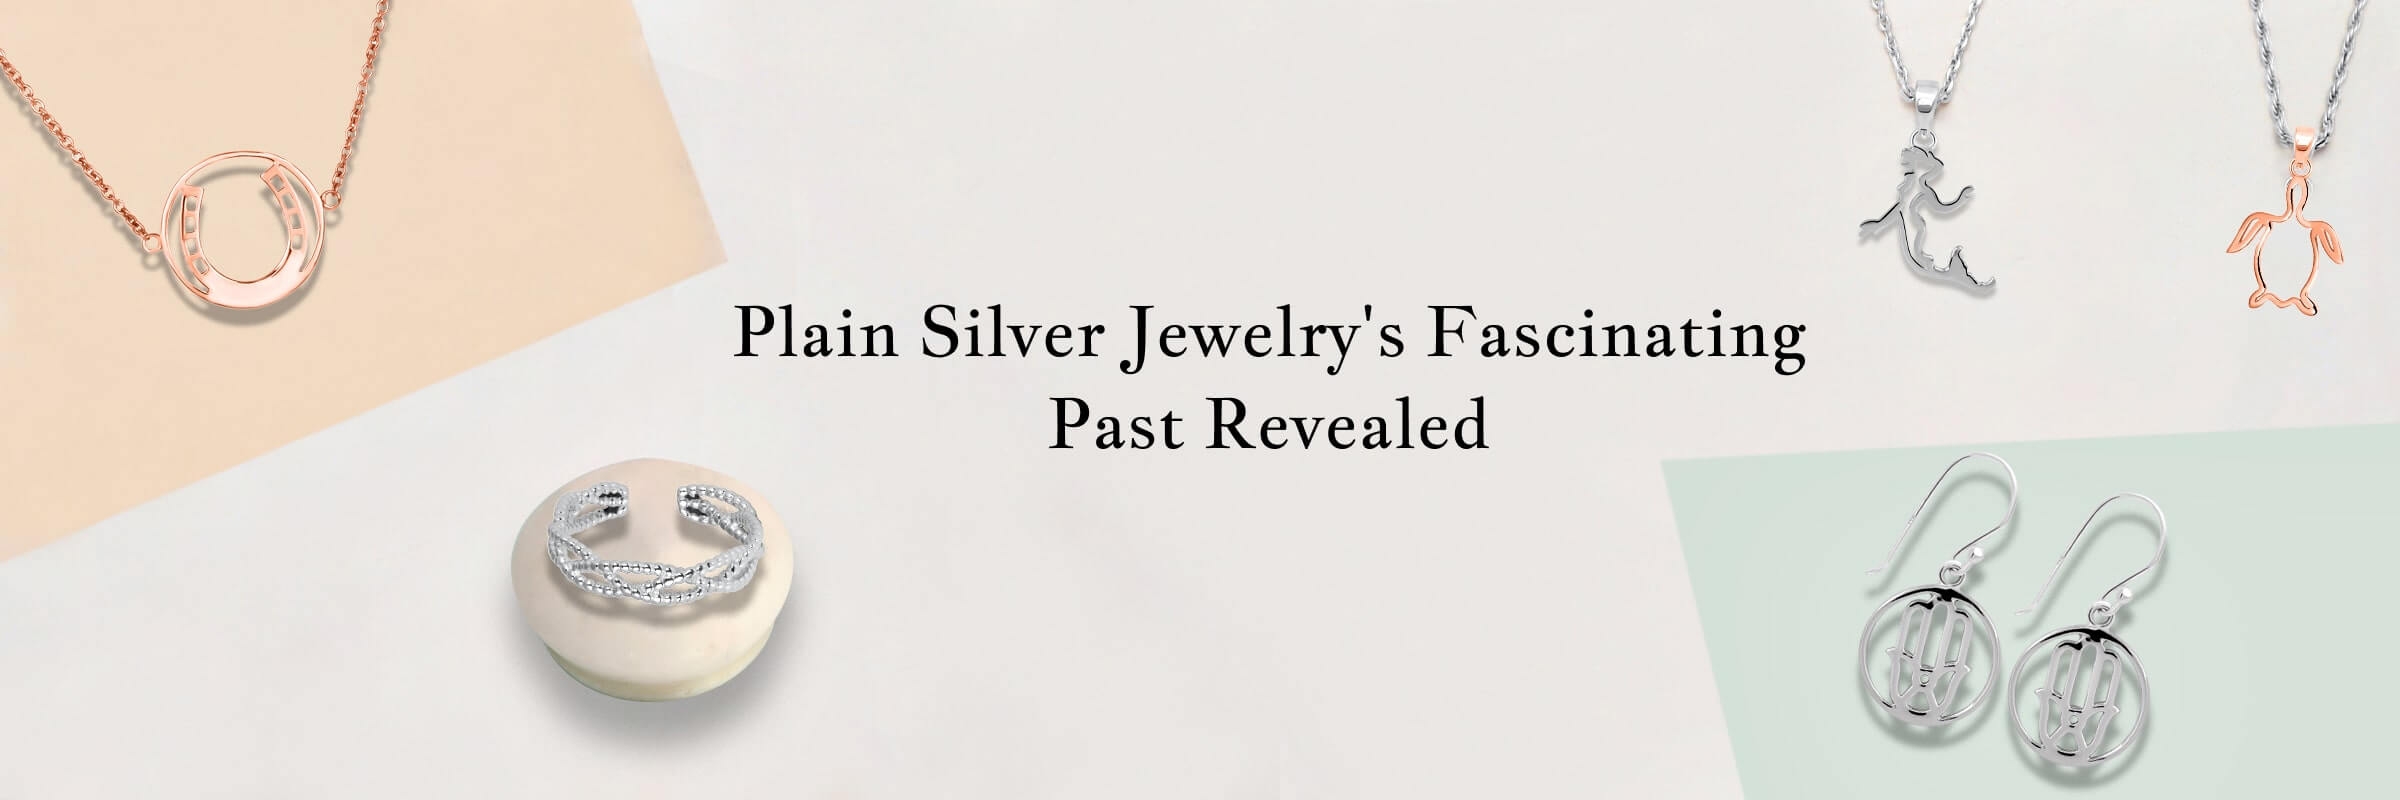 History of Plain Silver Jewelry